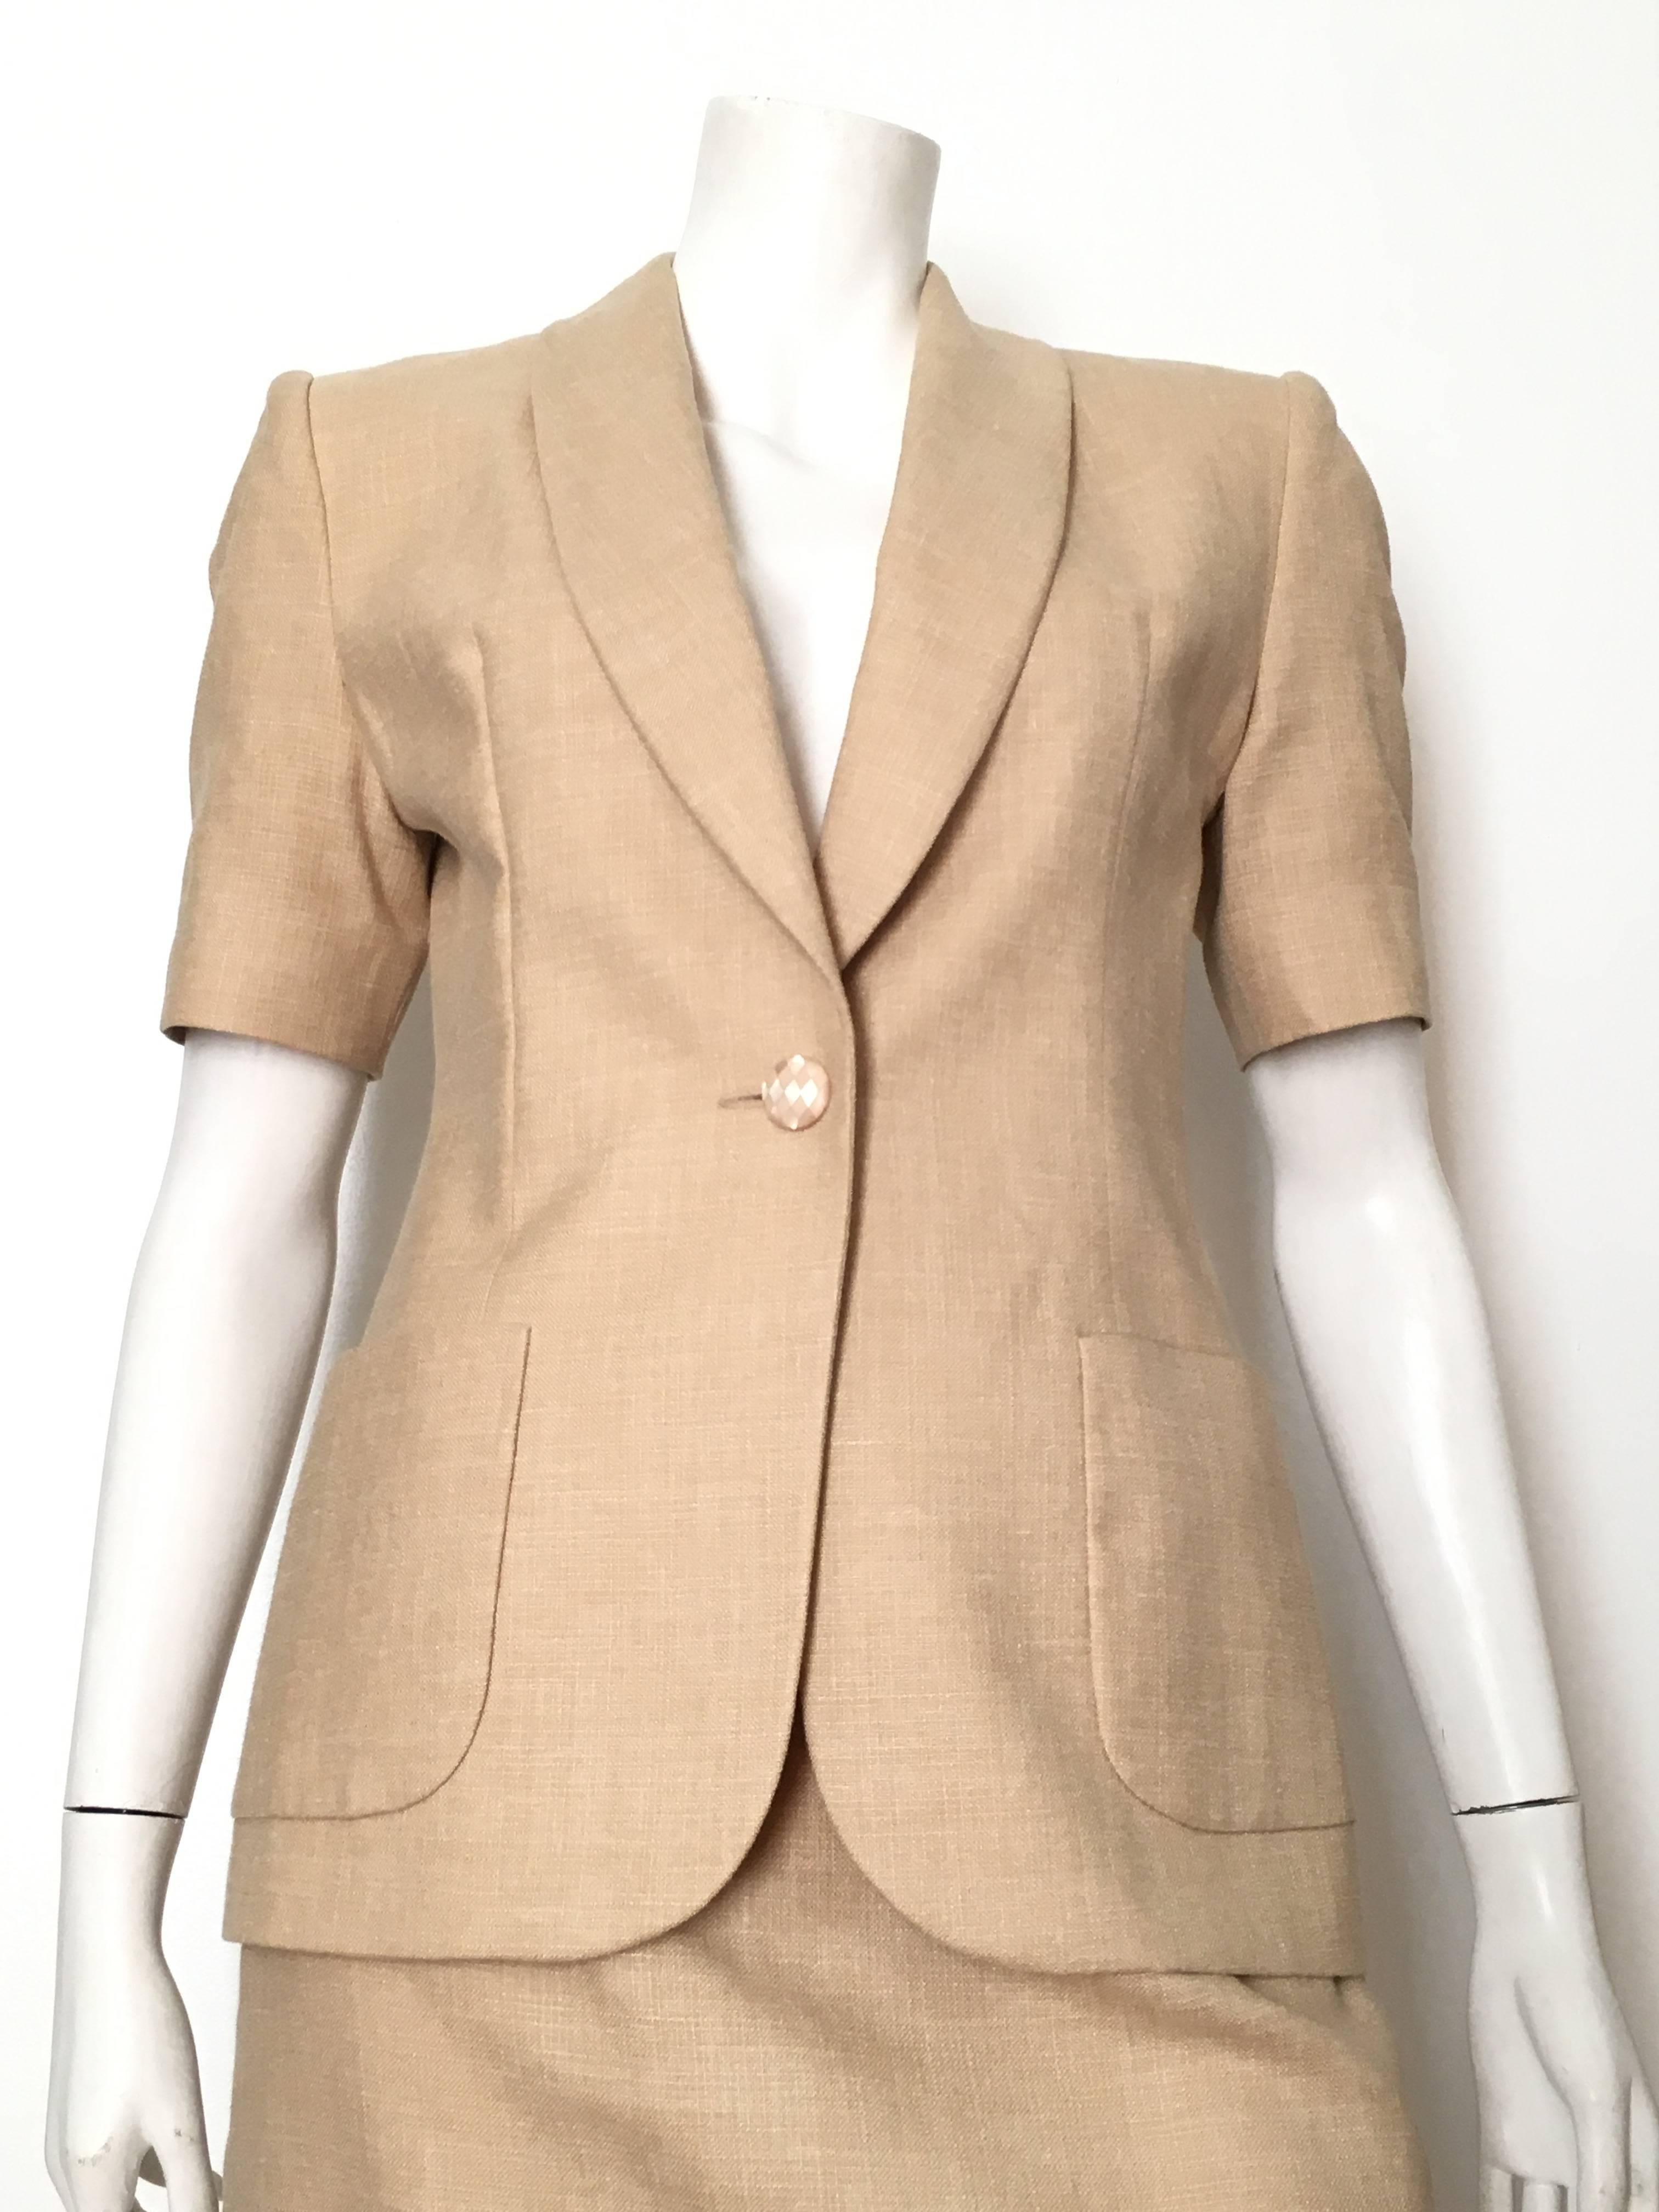 Givenchy Couture 1990s tan linen-silk-wool jacket & skirt set is a French size 40 and fits an USA size 6.  Ladies please grab your best boyfriend, Mr. Tape Measure, and measure your bust, waist & hips to make certain this gorgeous suit will